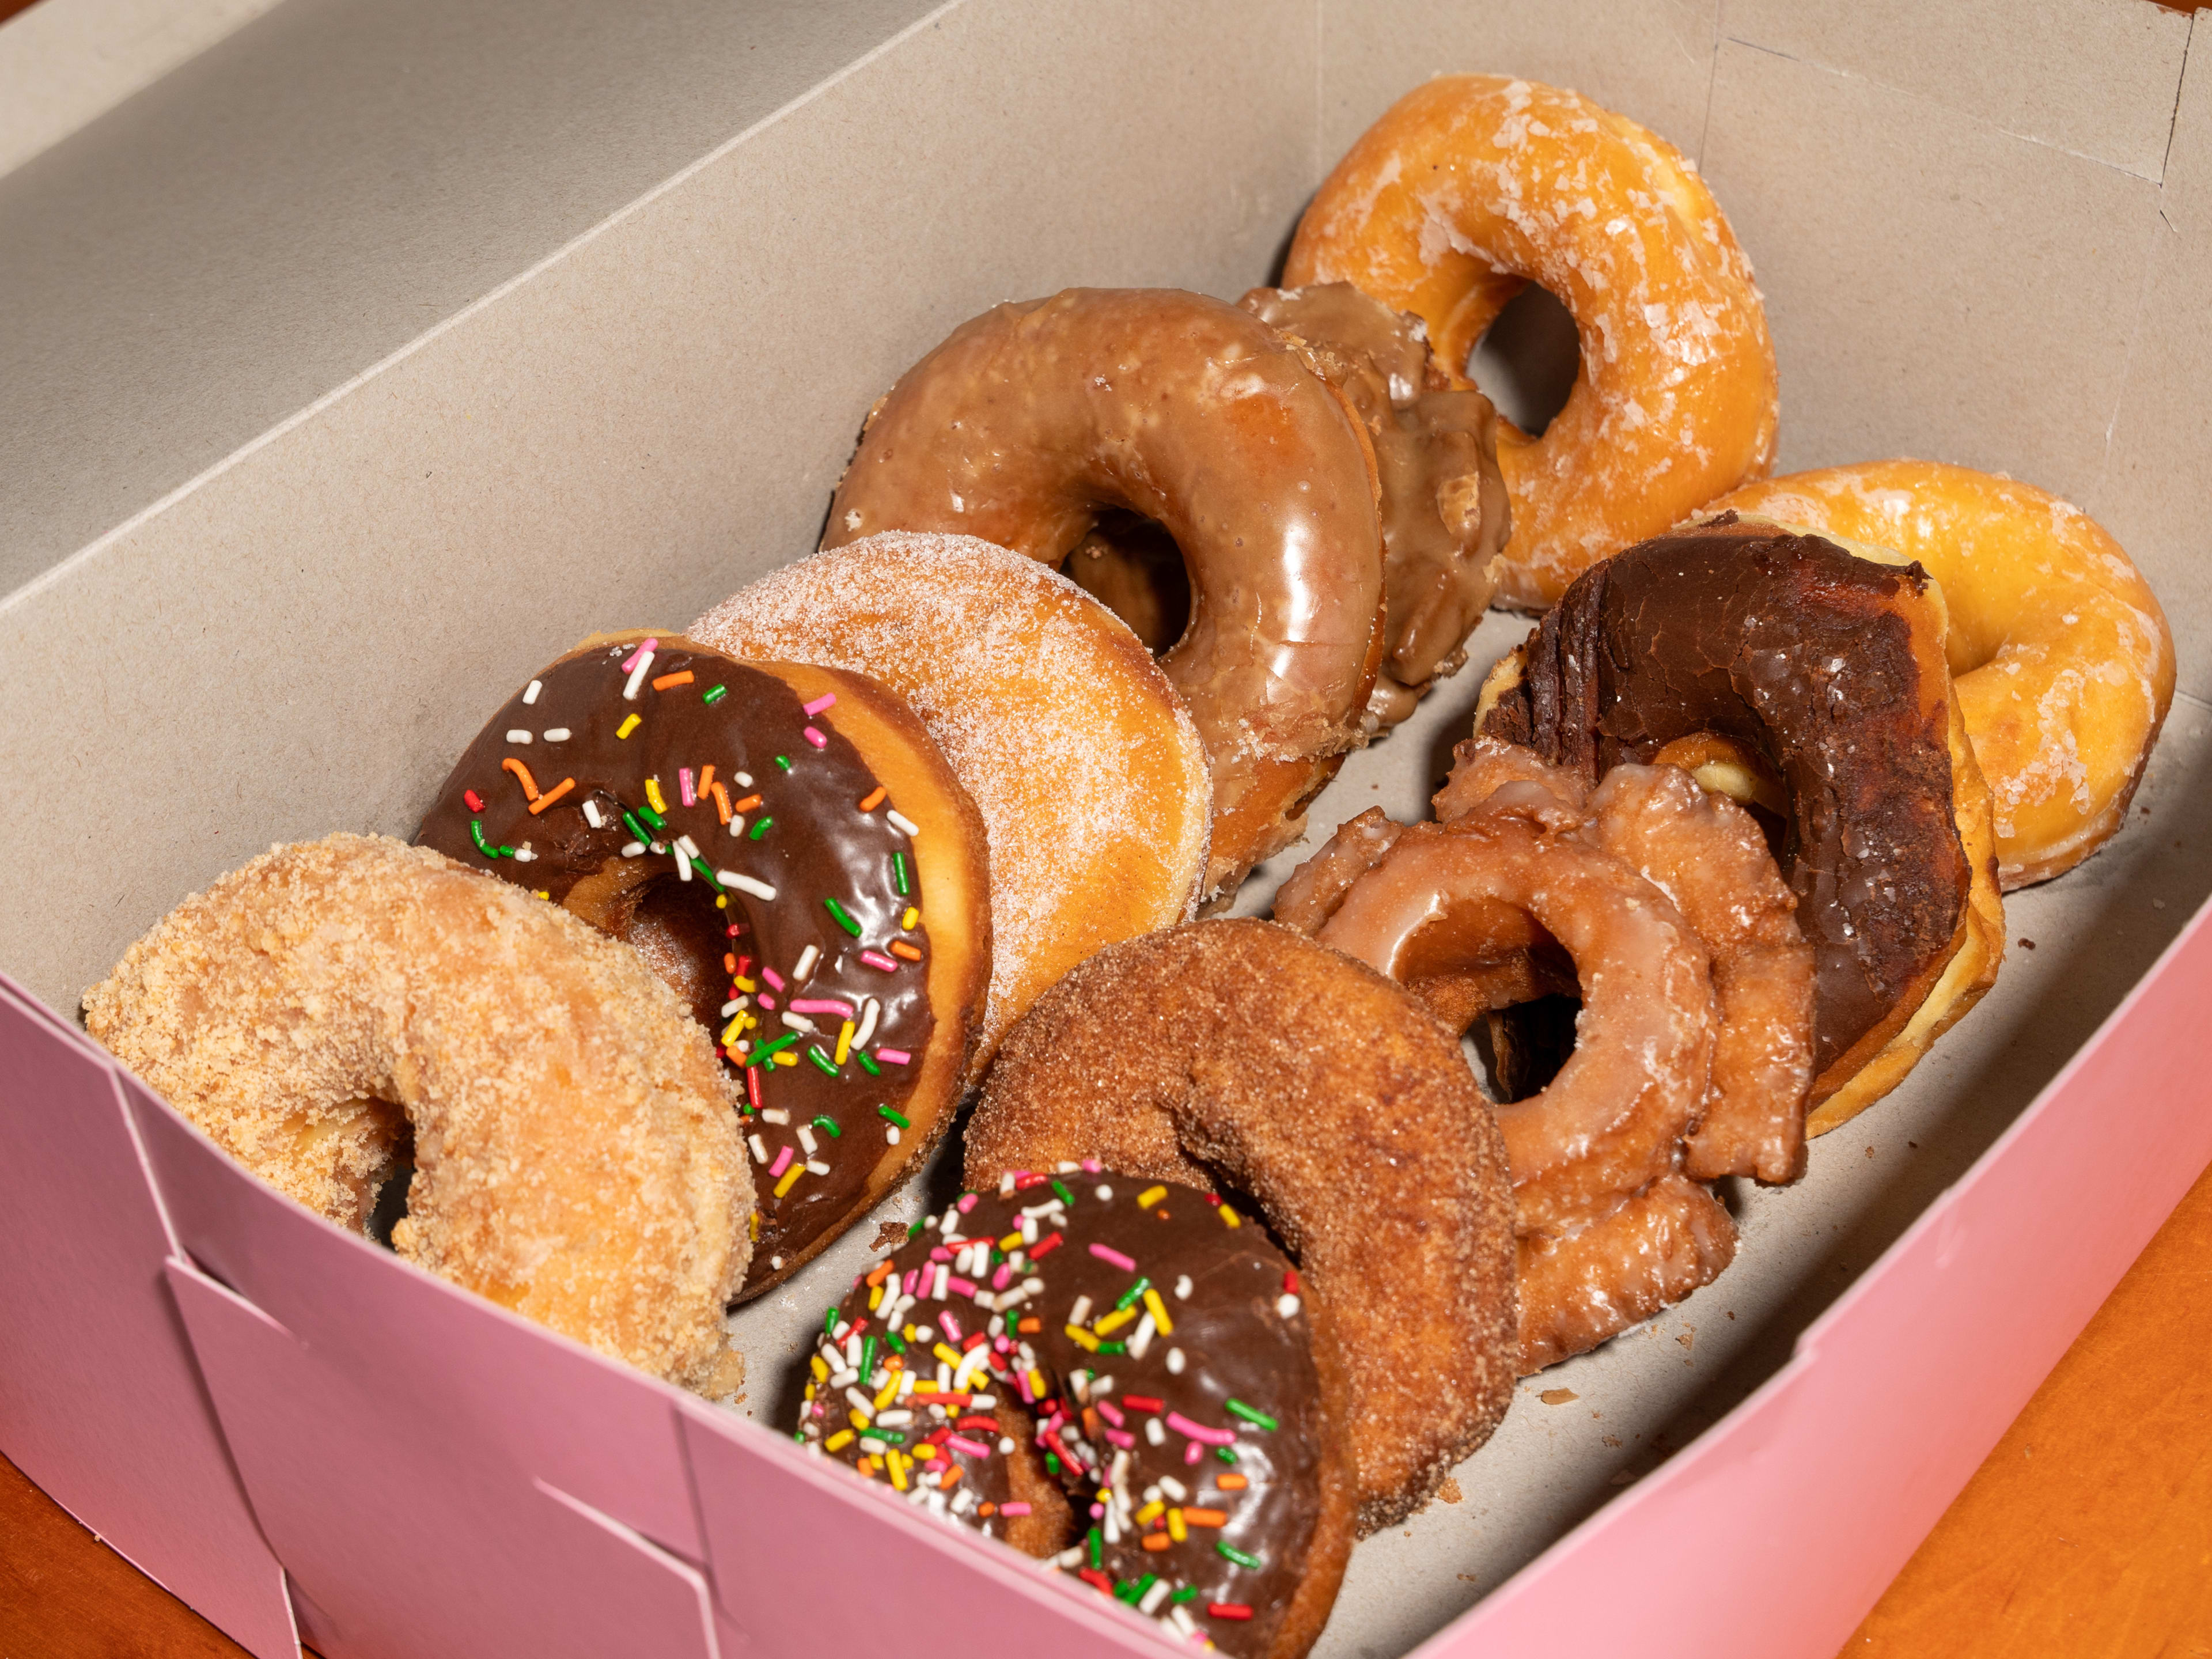 The Best Donuts In SF image